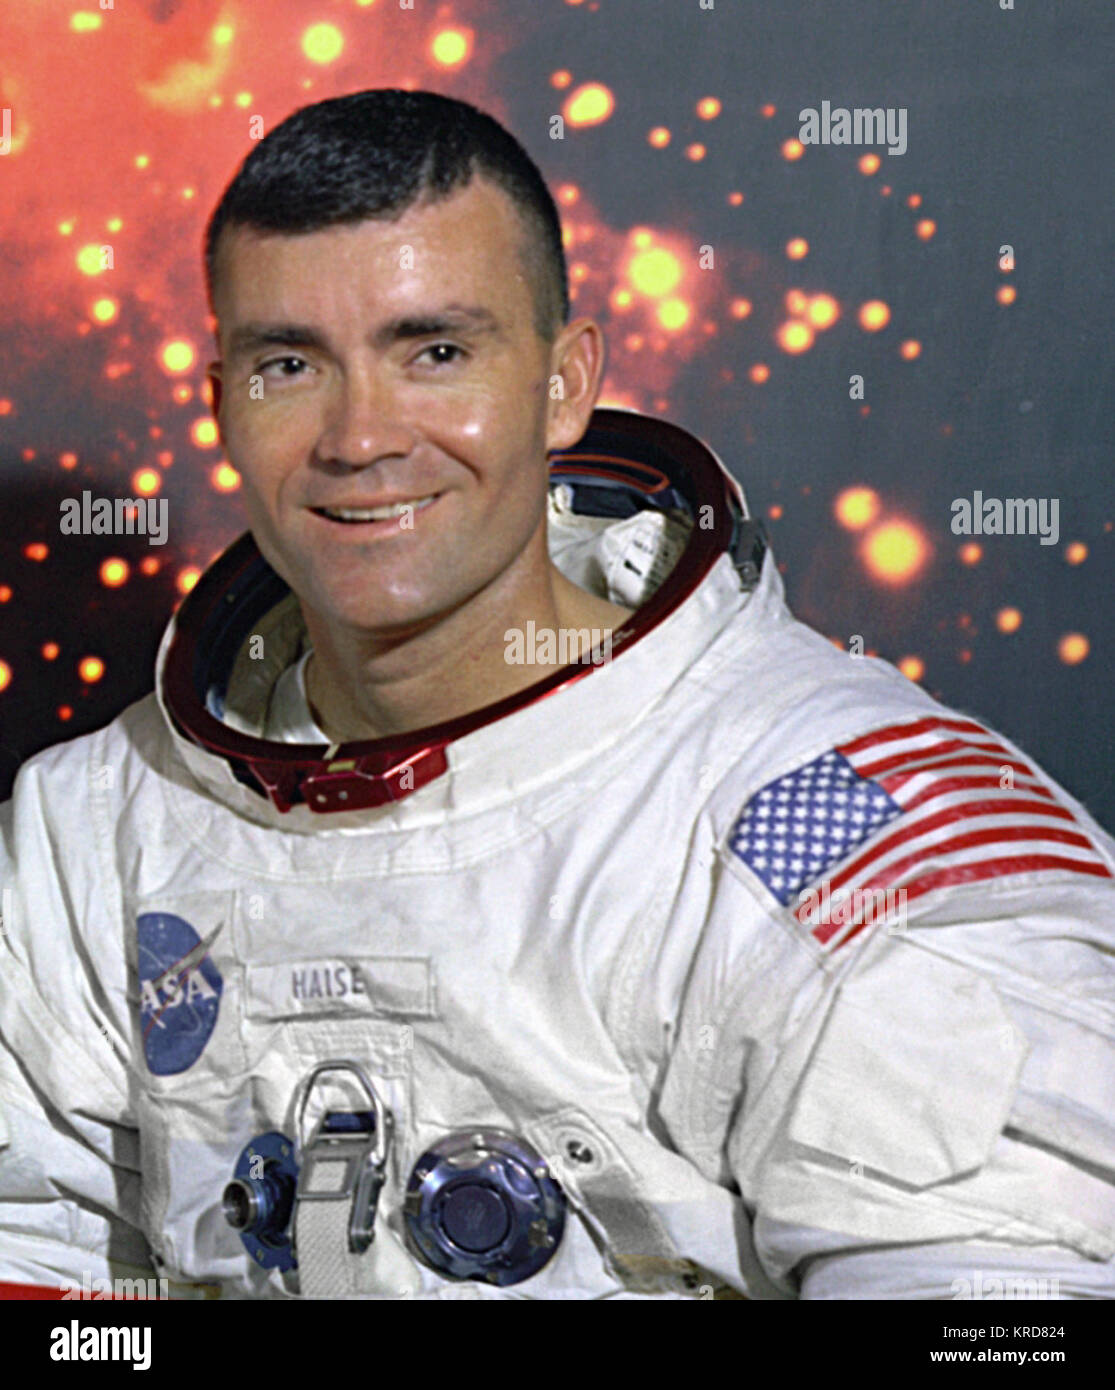 Fred Haise GPN-2000-001166 Stock Photo